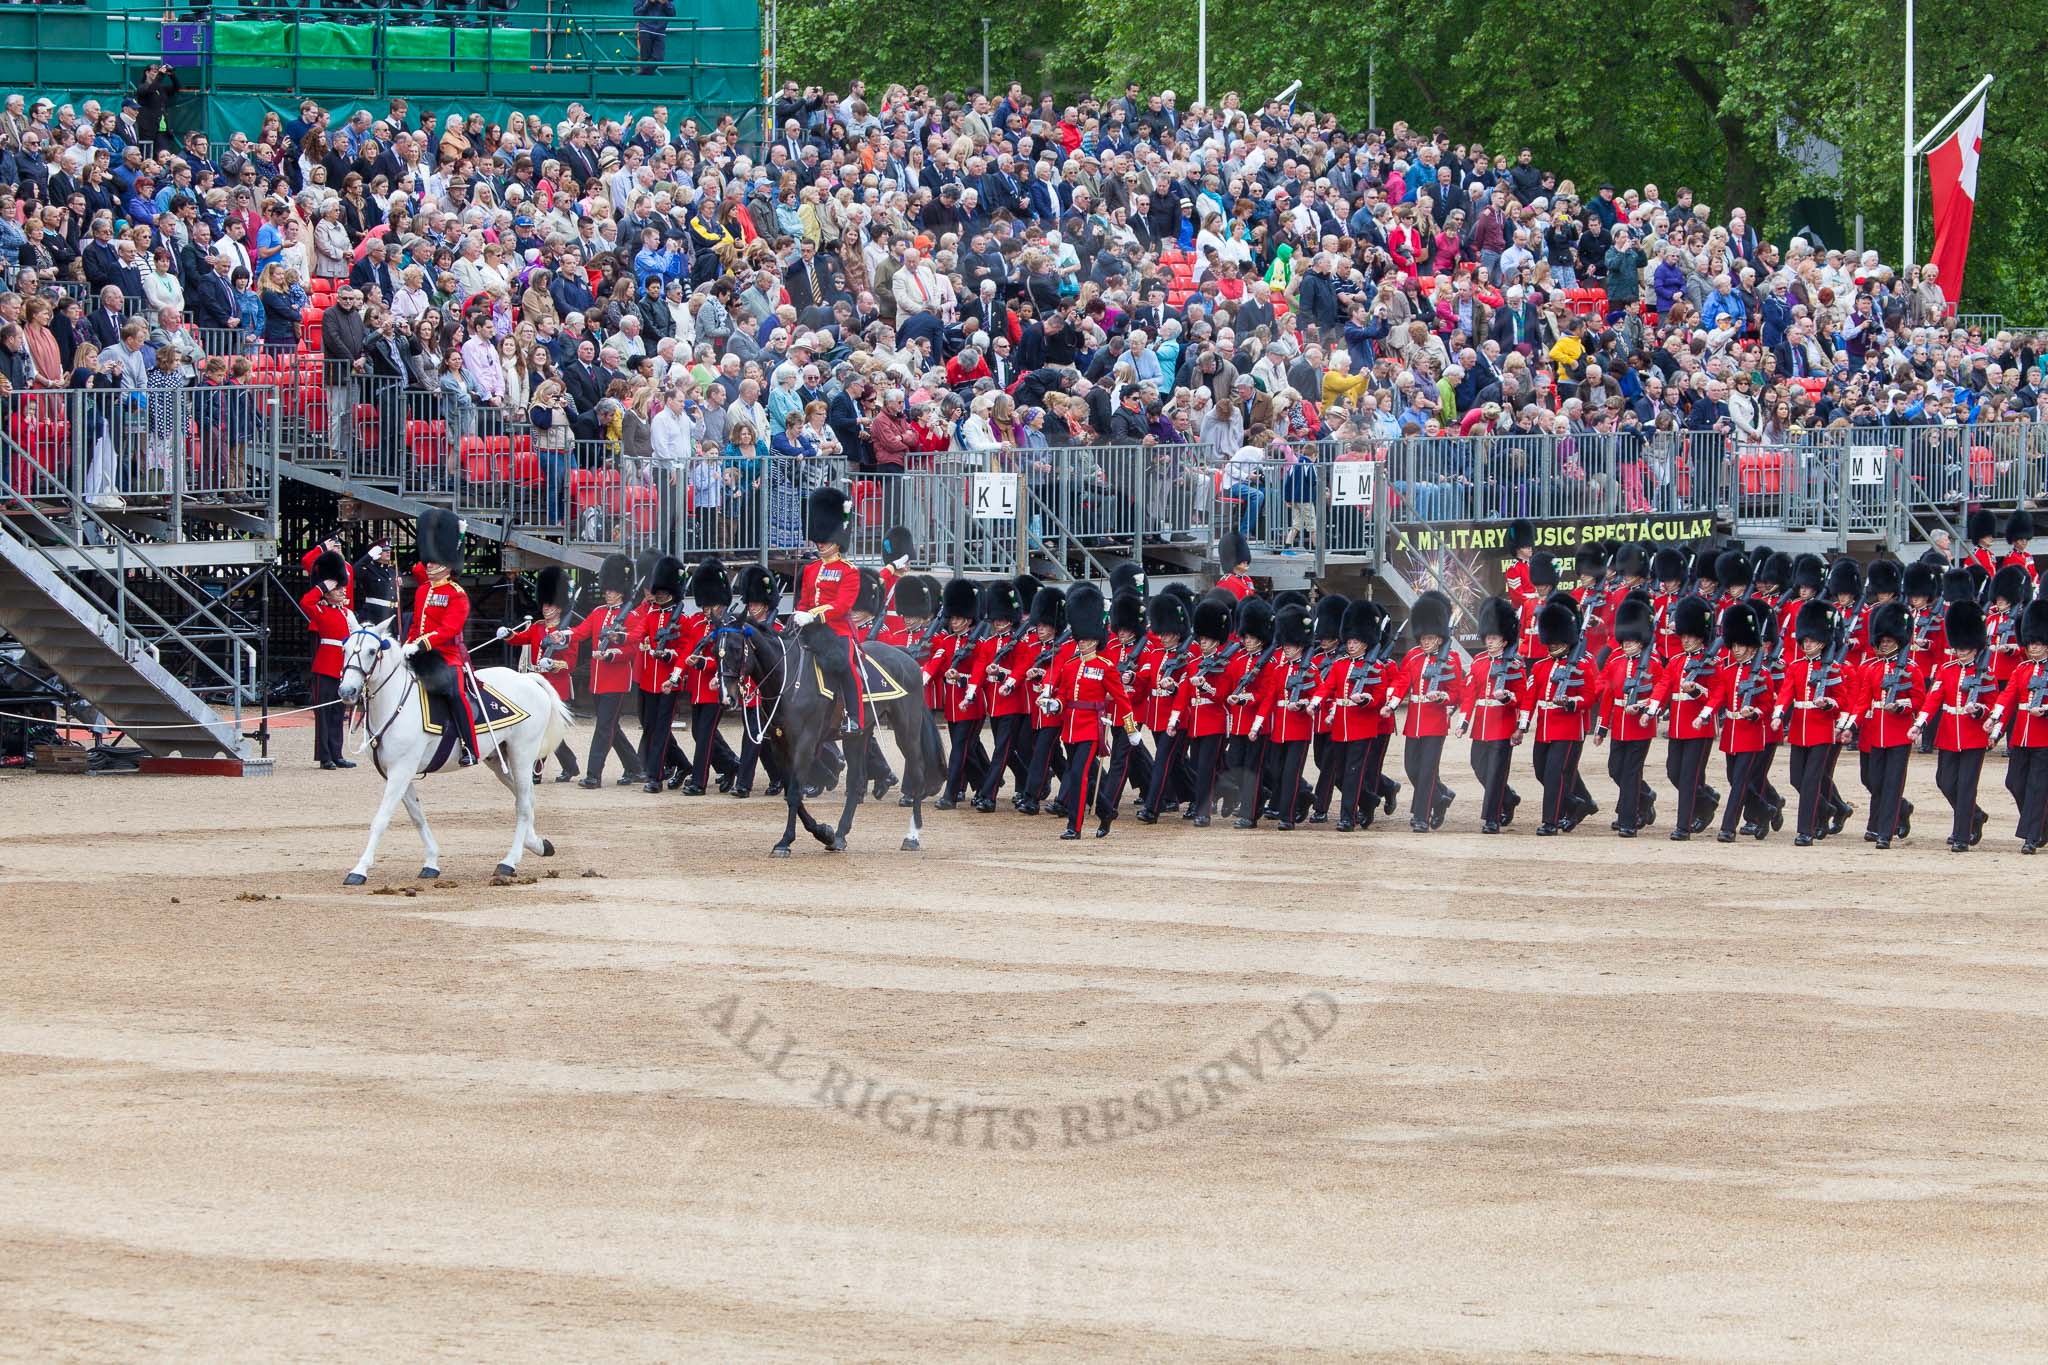 Major General's Review 2013: The March Past in Quick Time - No.1 Guard, the Escort to the Colour, following the Field Officer and the Major of the Parade..
Horse Guards Parade, Westminster,
London SW1,

United Kingdom,
on 01 June 2013 at 11:41, image #534